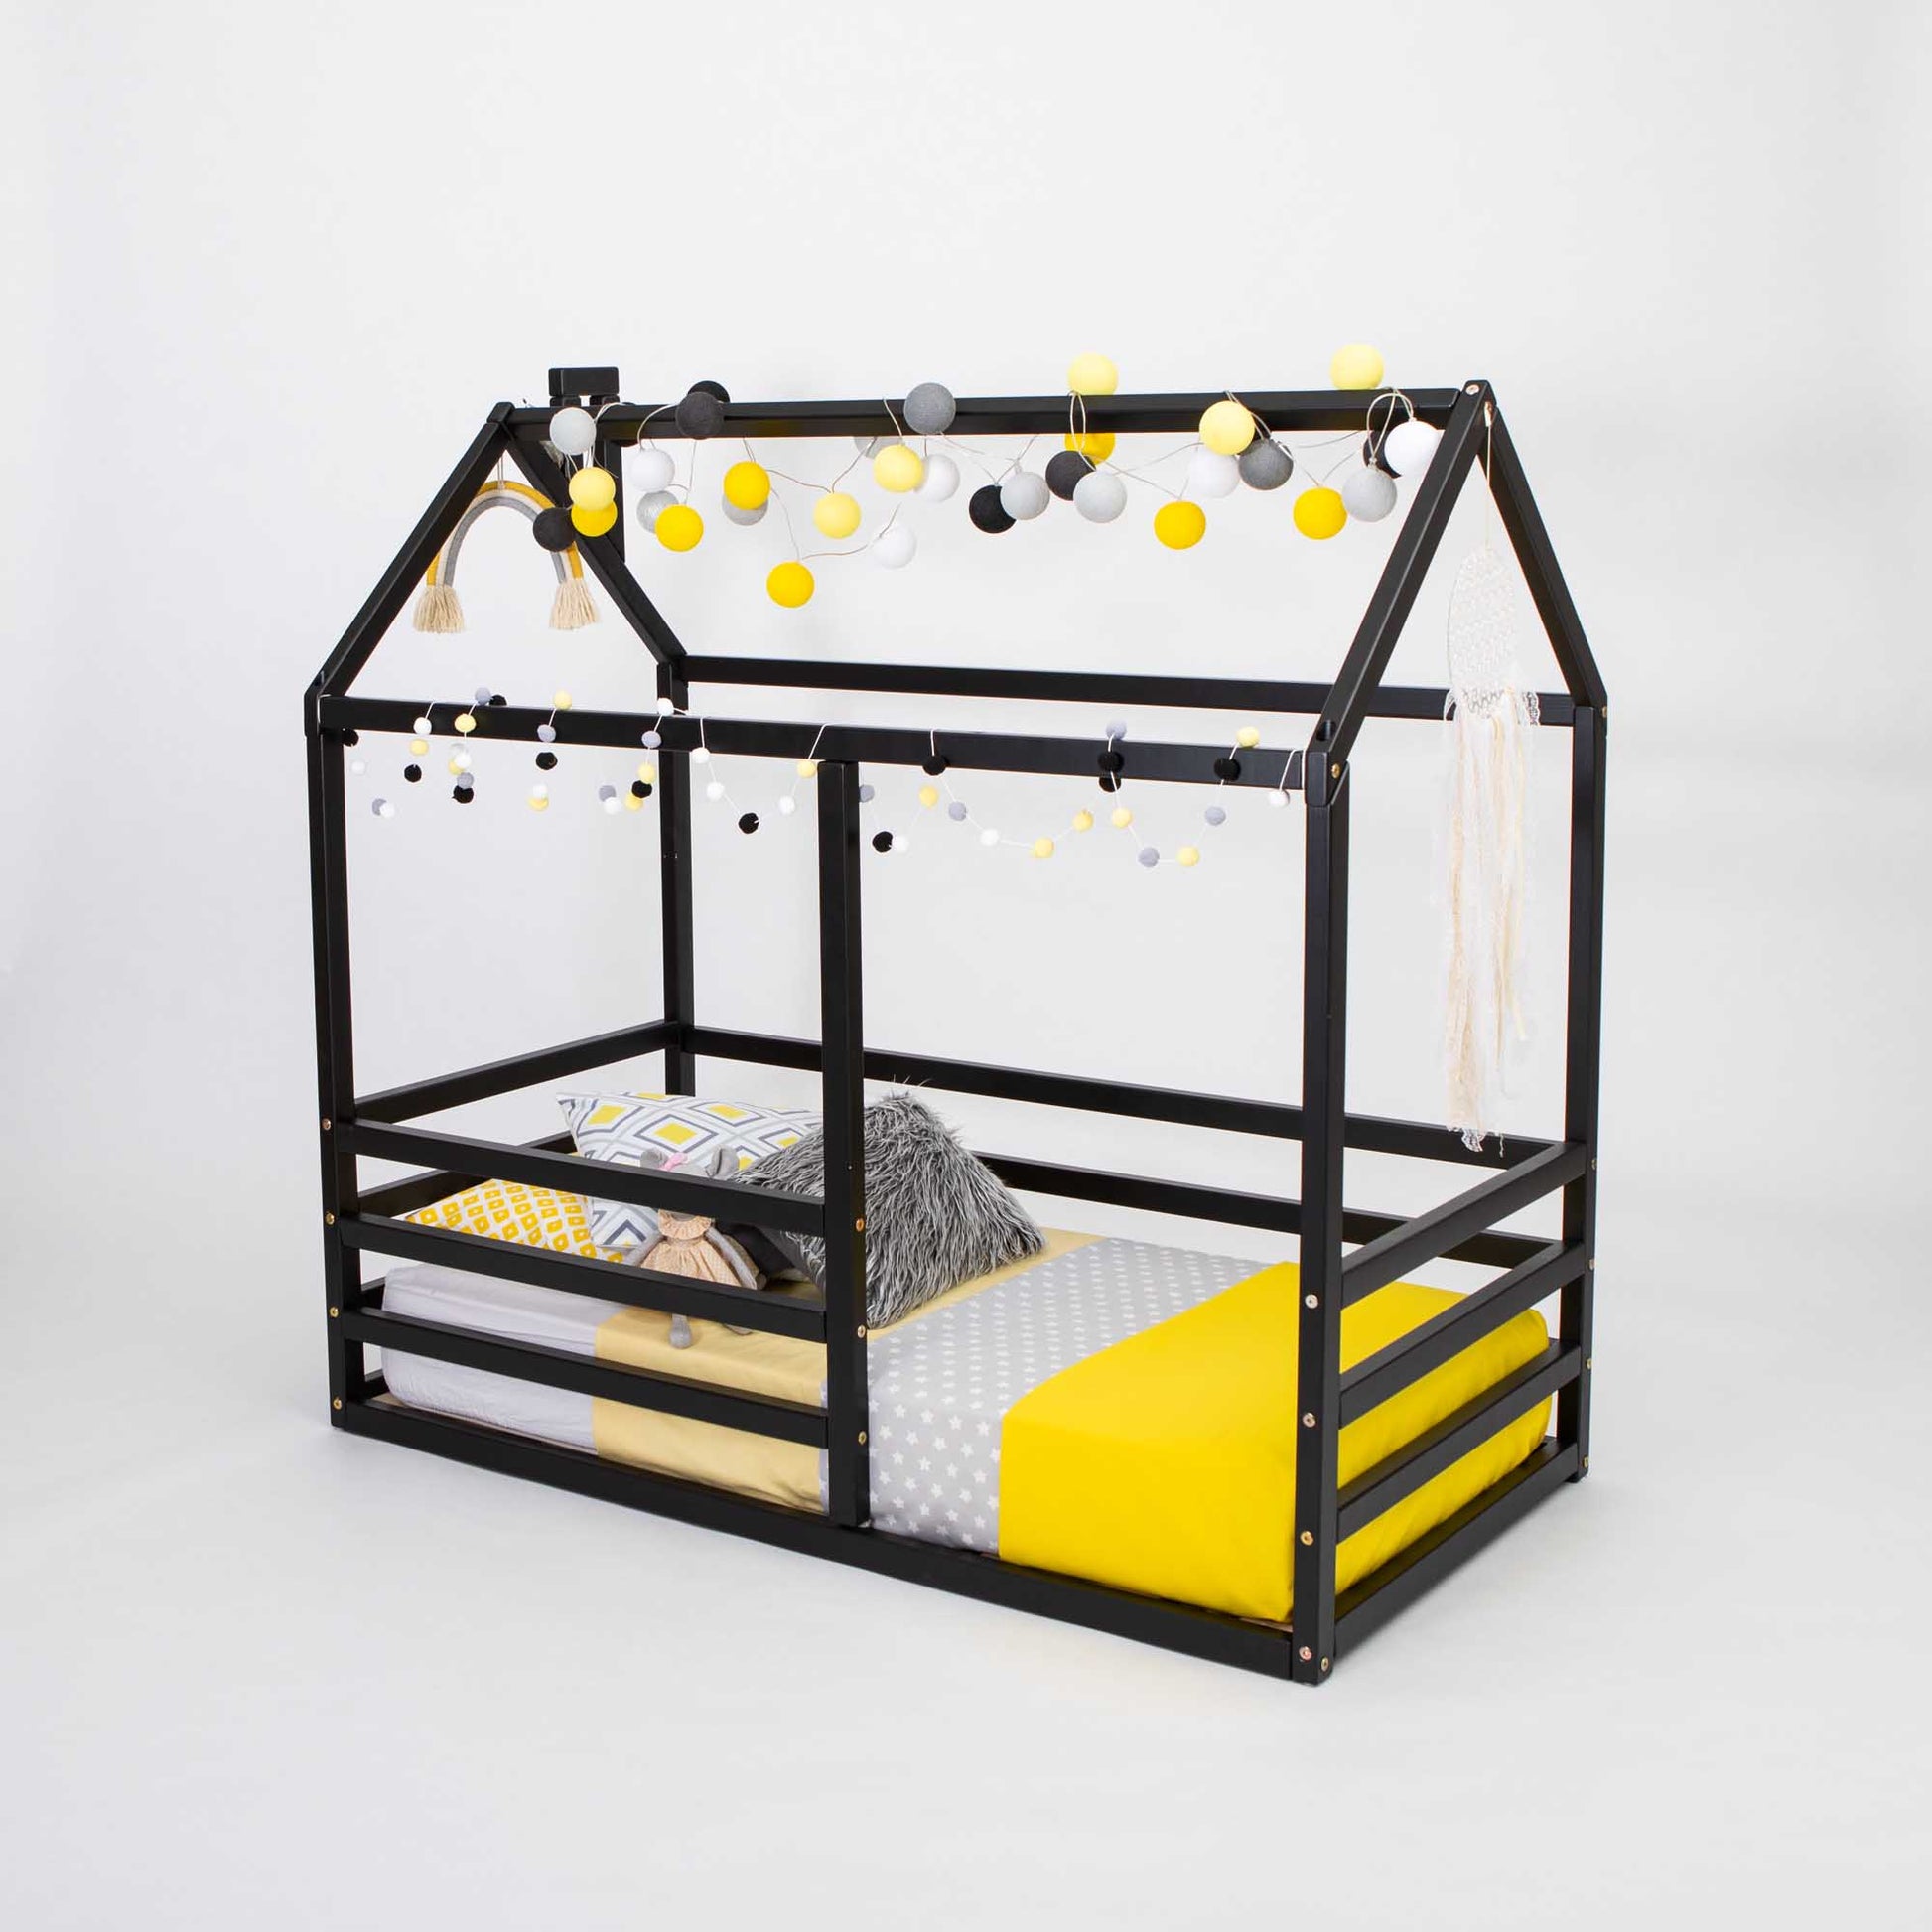 A black floor level house bed with a horizontal fence with yellow decorations.